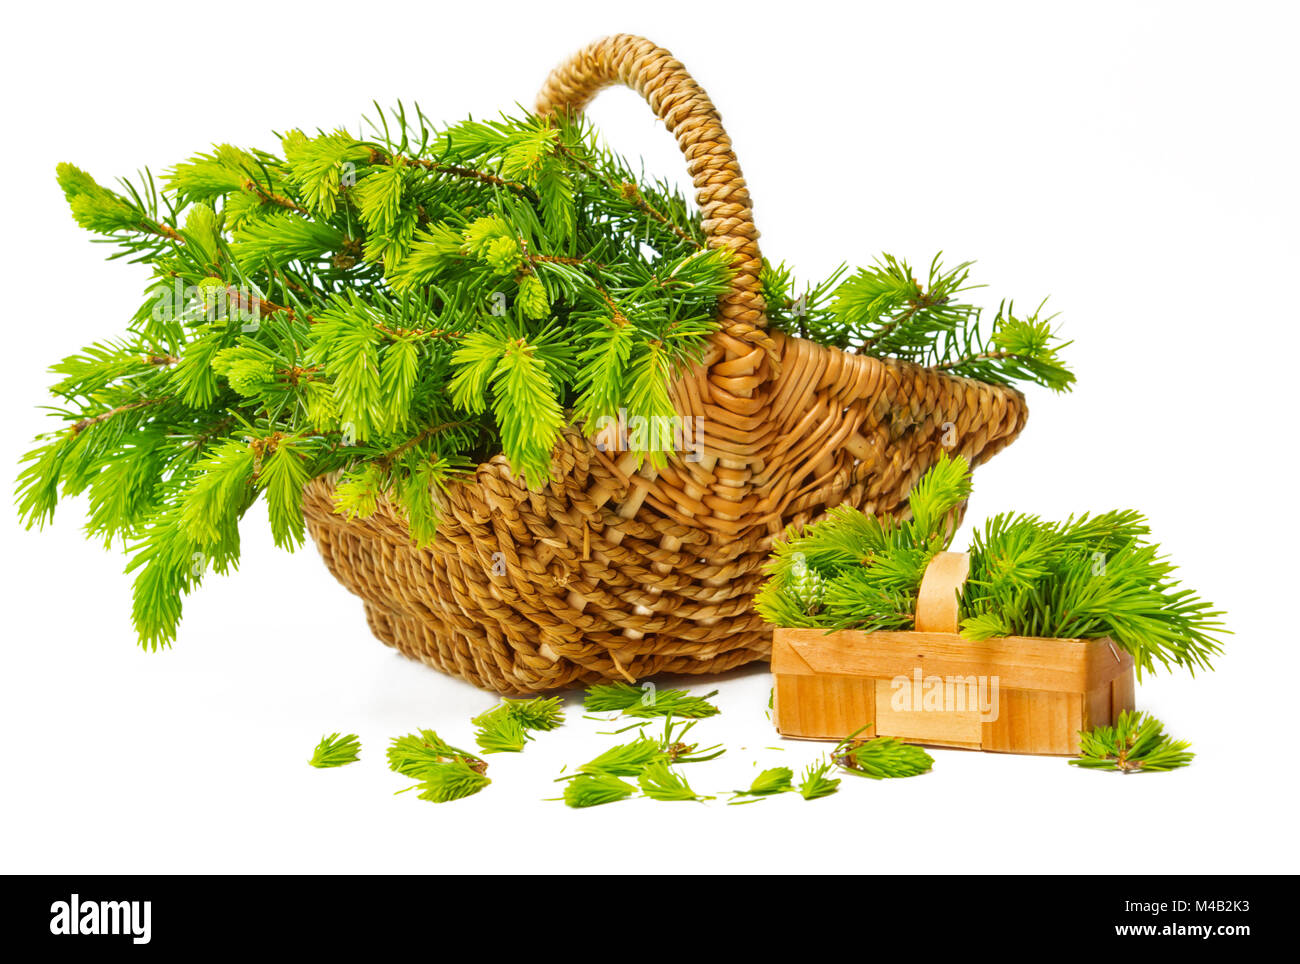 May shoots,collected in a basket Stock Photo